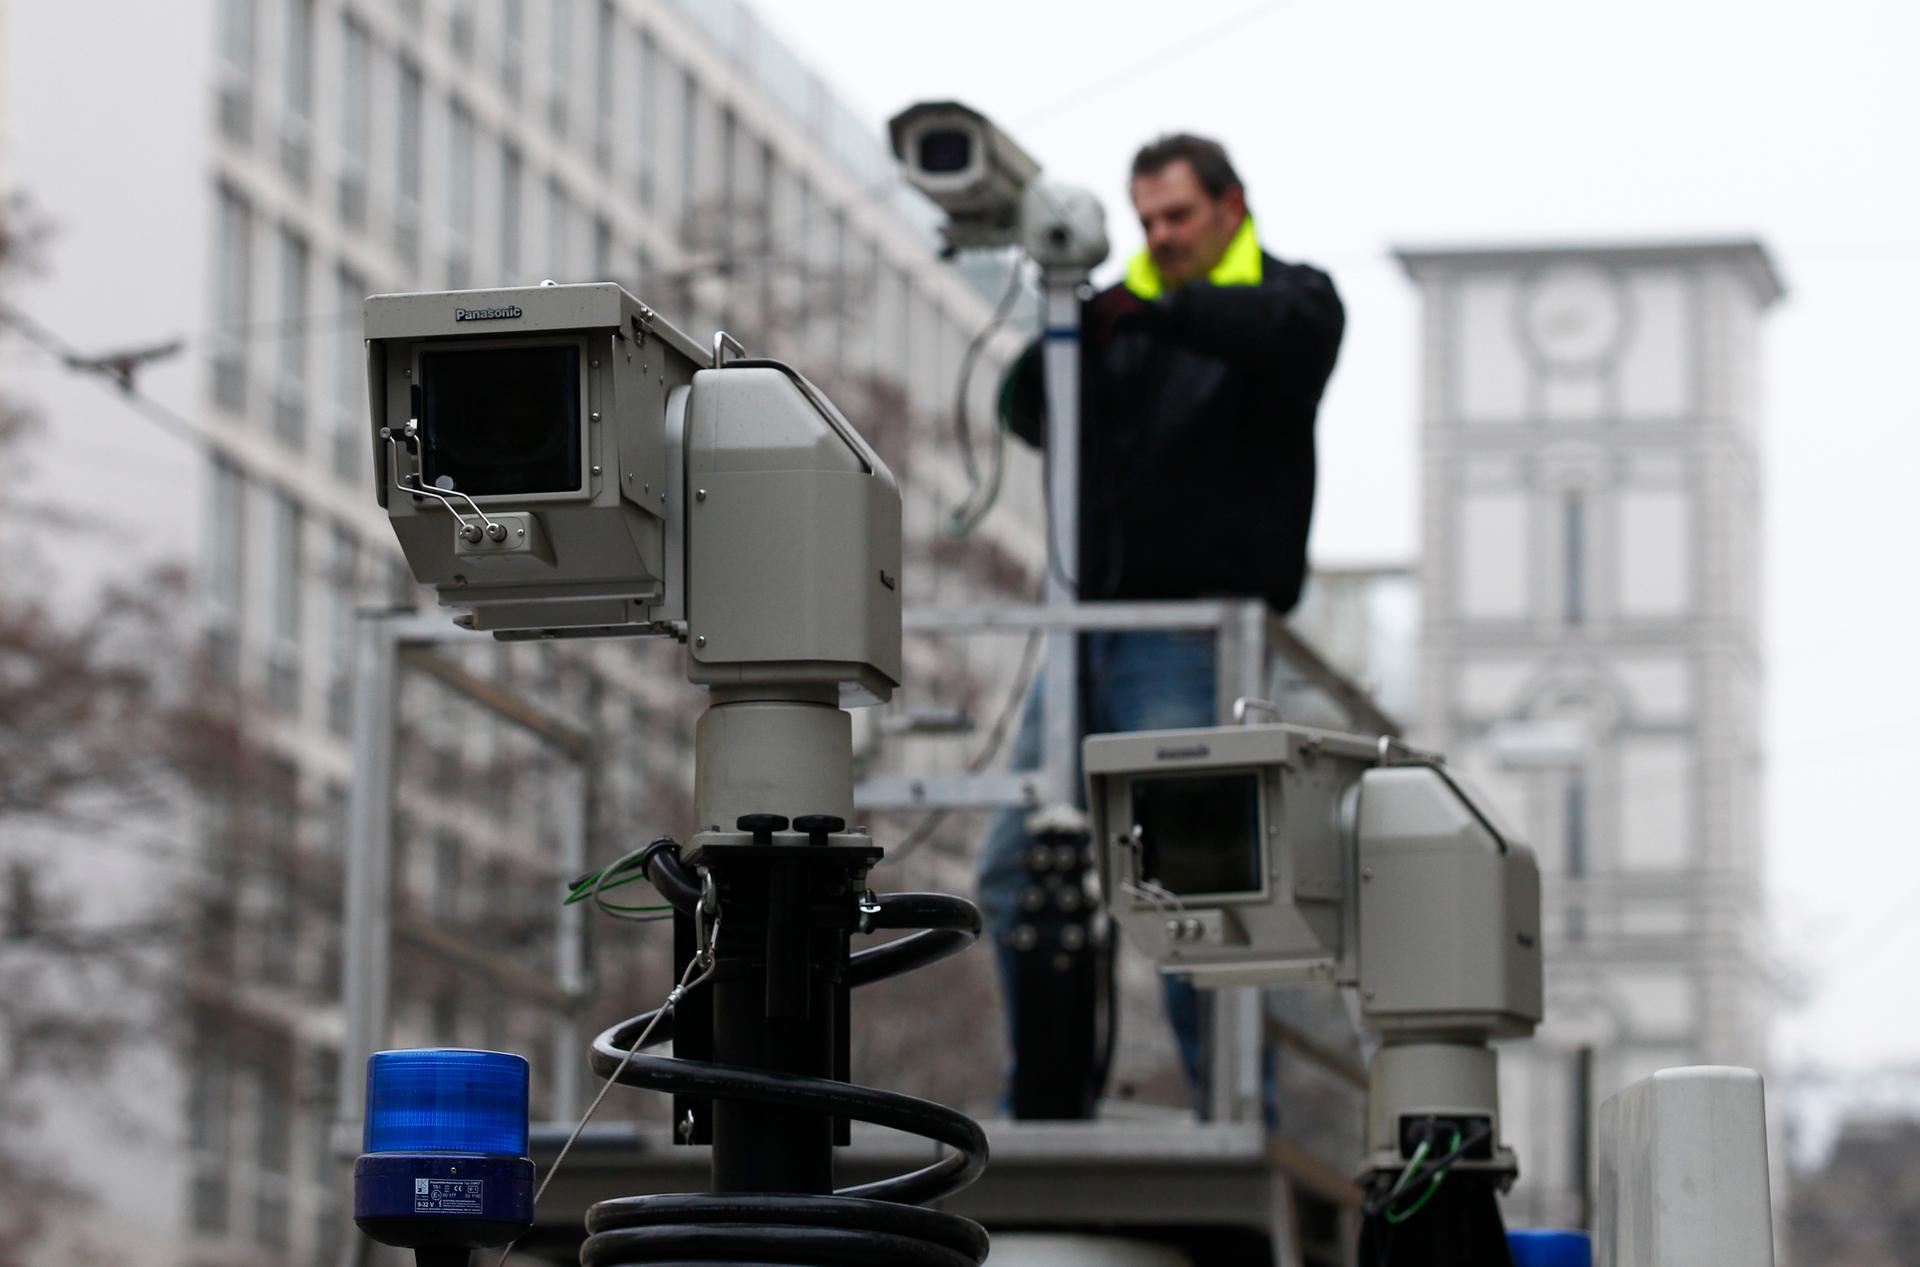 A man assembles police observation cameras near the Bayerischer Hof hotel before the start of the 50th Conference on Security Policy in Munich on January 31, 2014